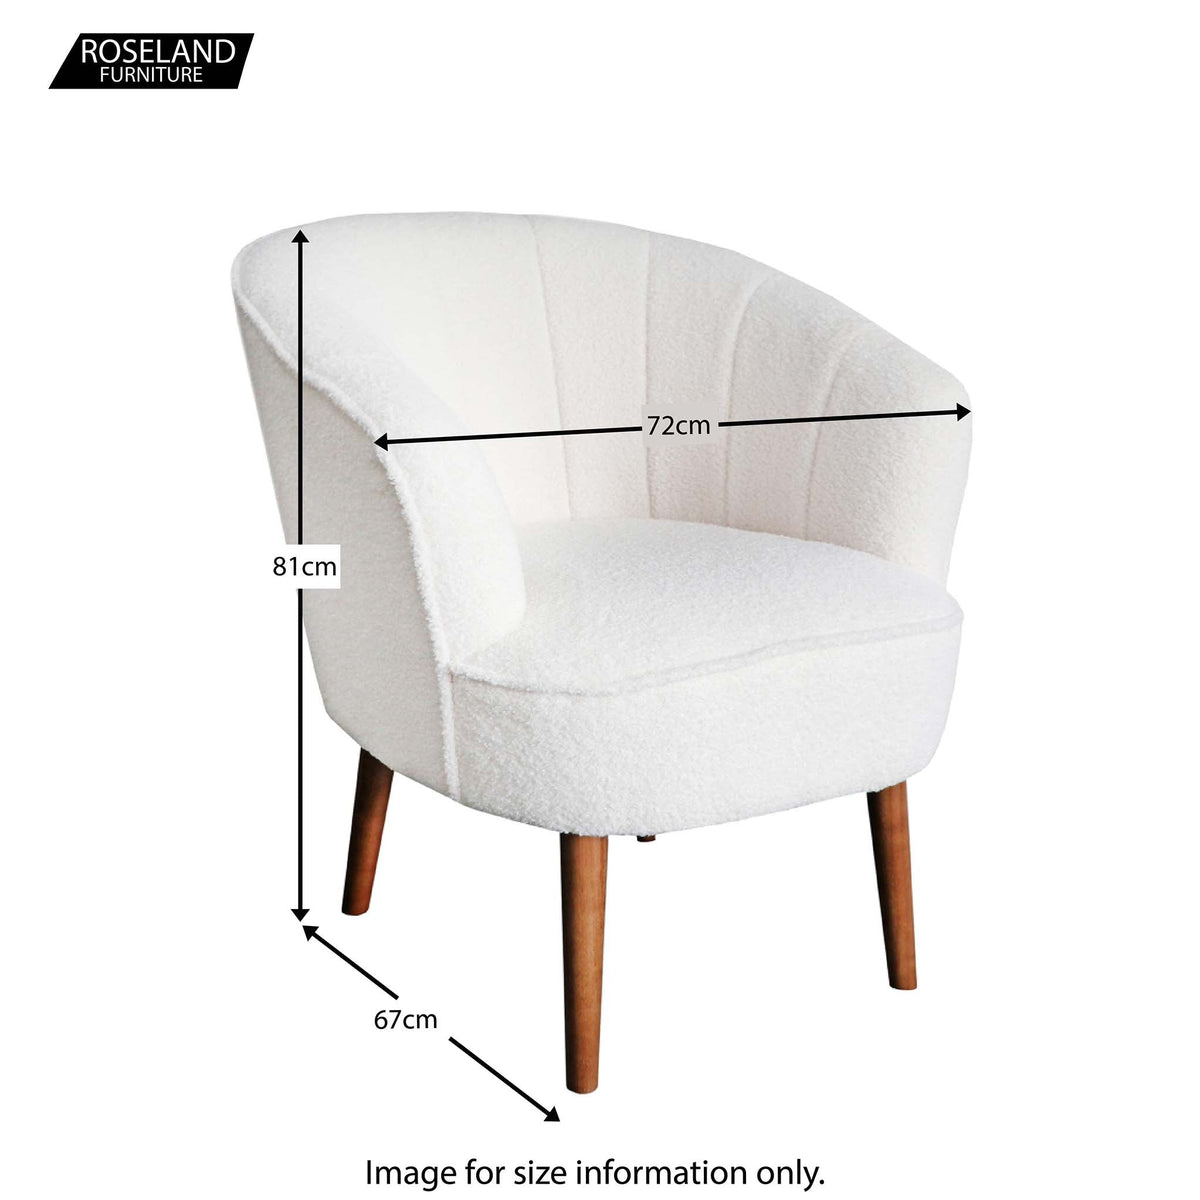 Lorie White Vanity Armchair - Size Guide